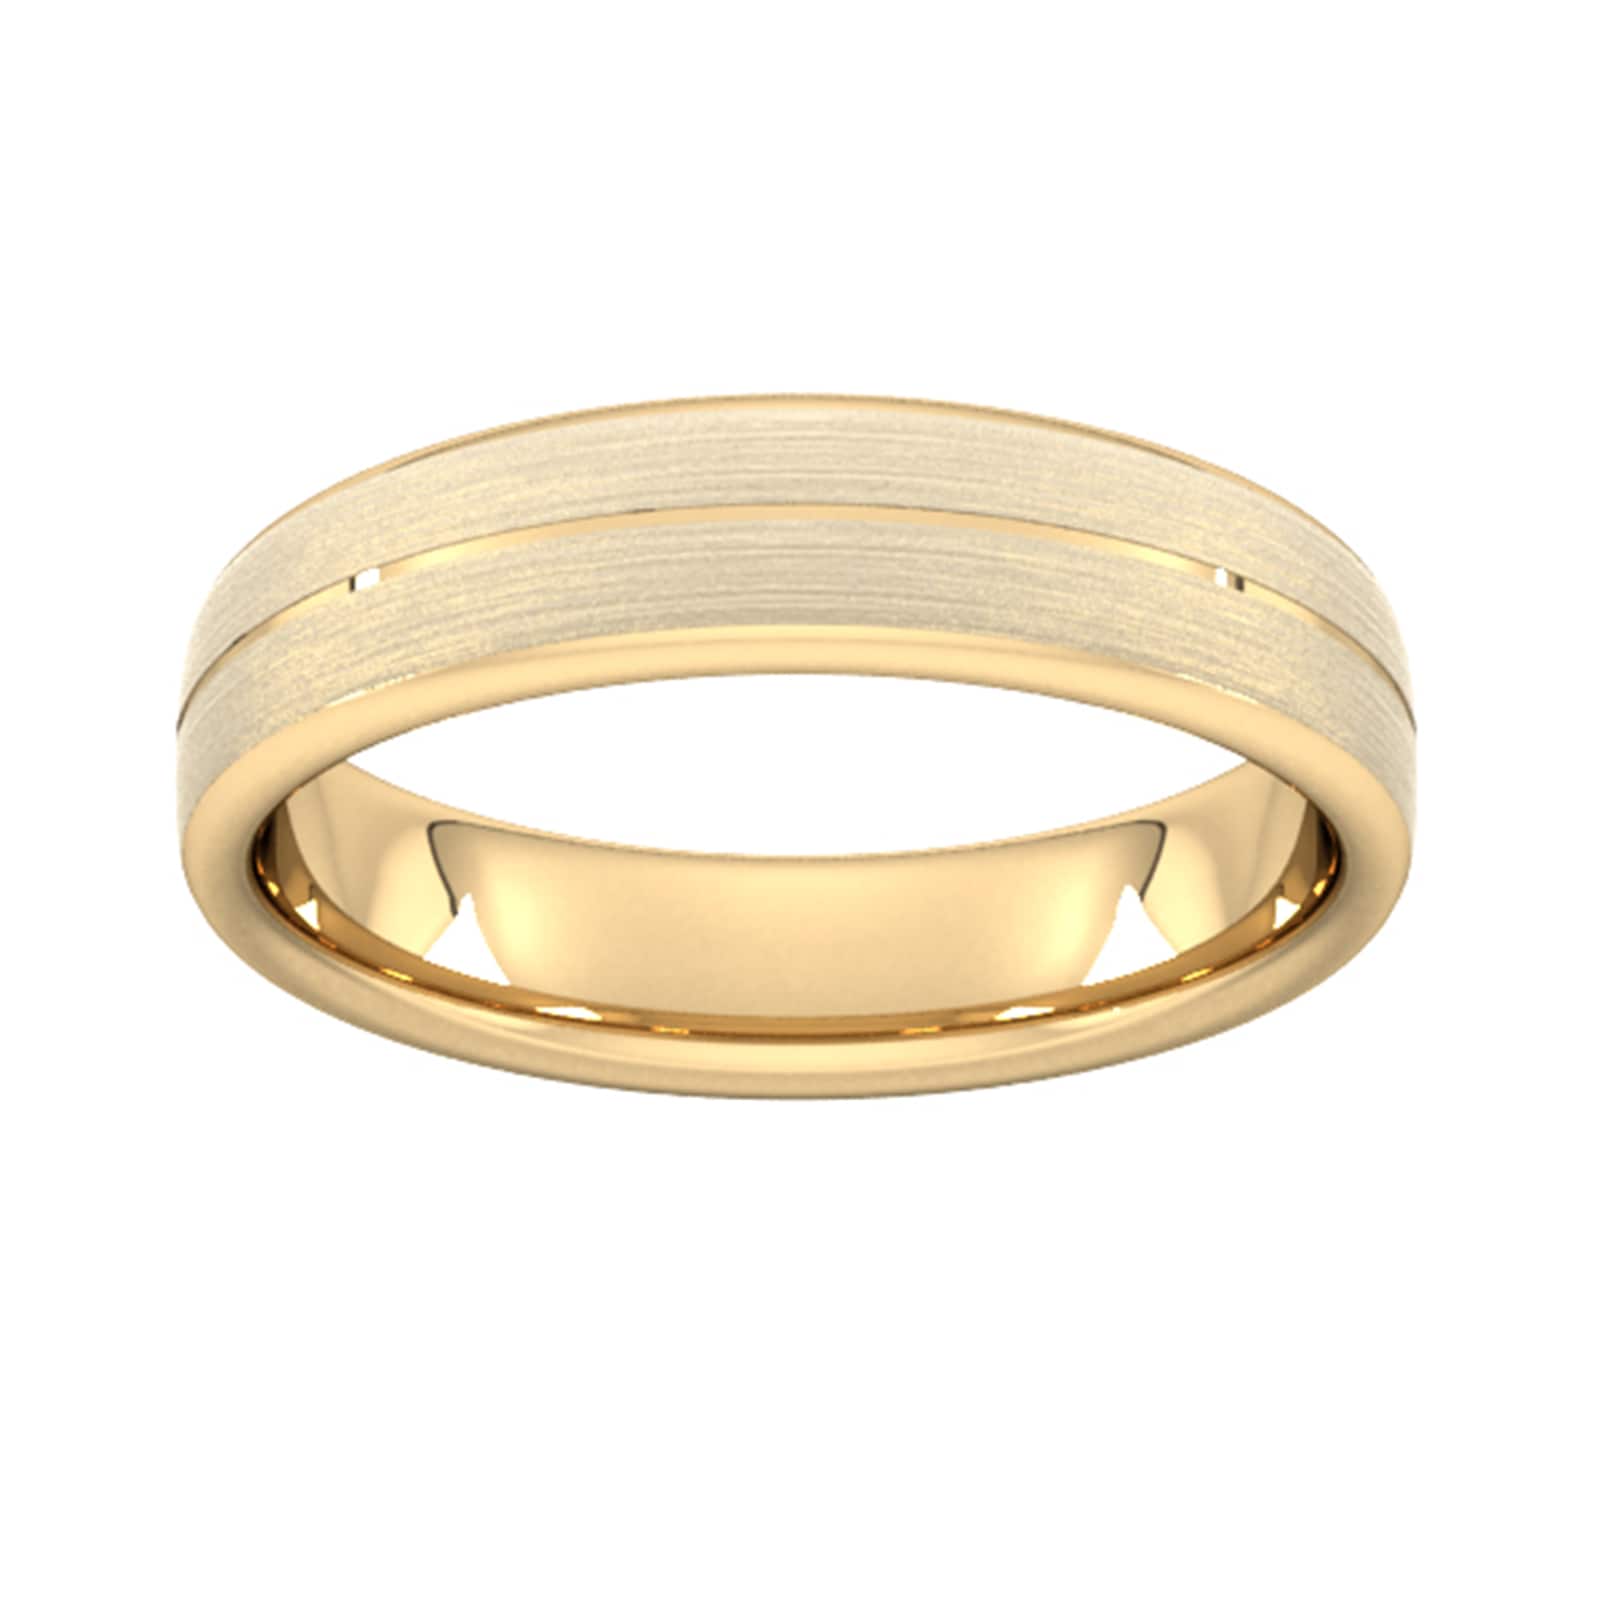 5mm Slight Court Heavy Centre Groove With Chamfered Edge Wedding Ring In 9 Carat Yellow Gold - Ring Size S